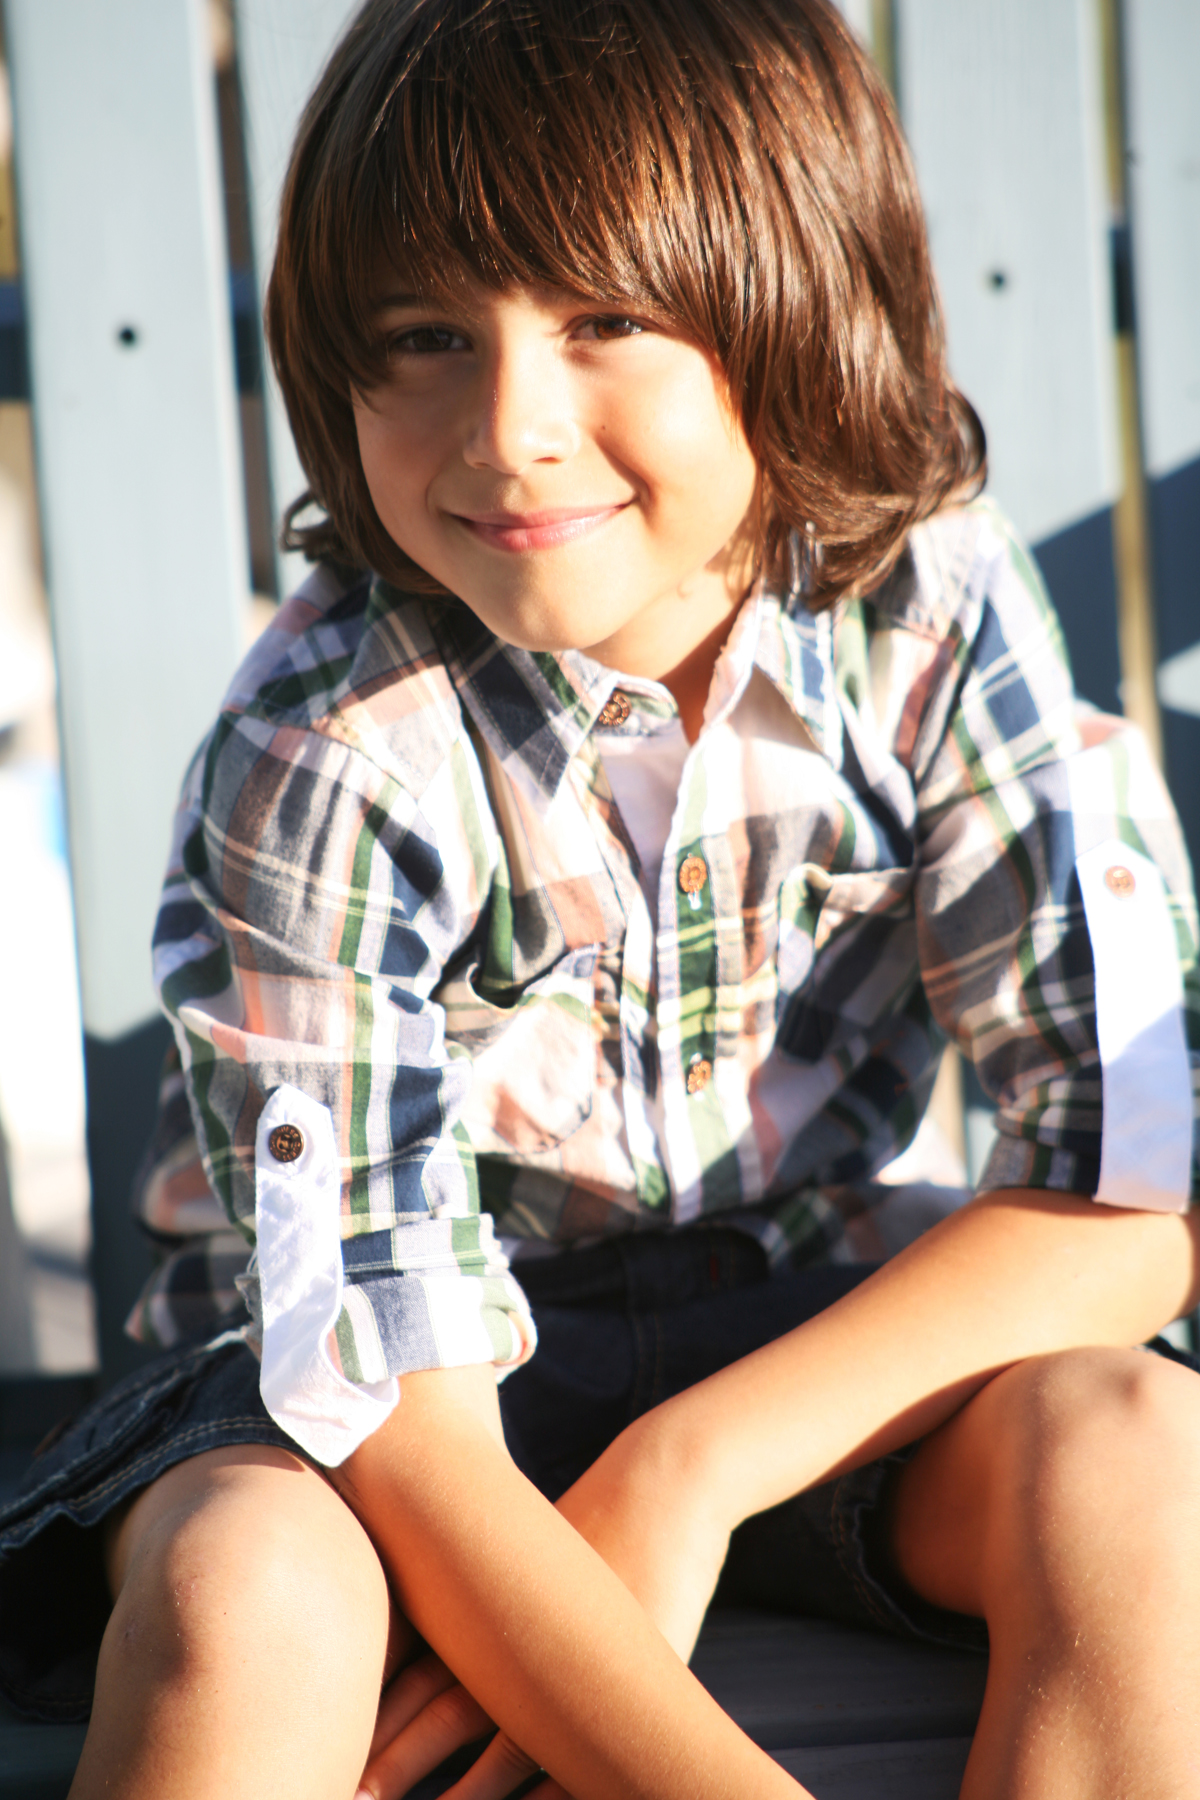 GUESS KIDS SPRING 2011 CAMPAIGN